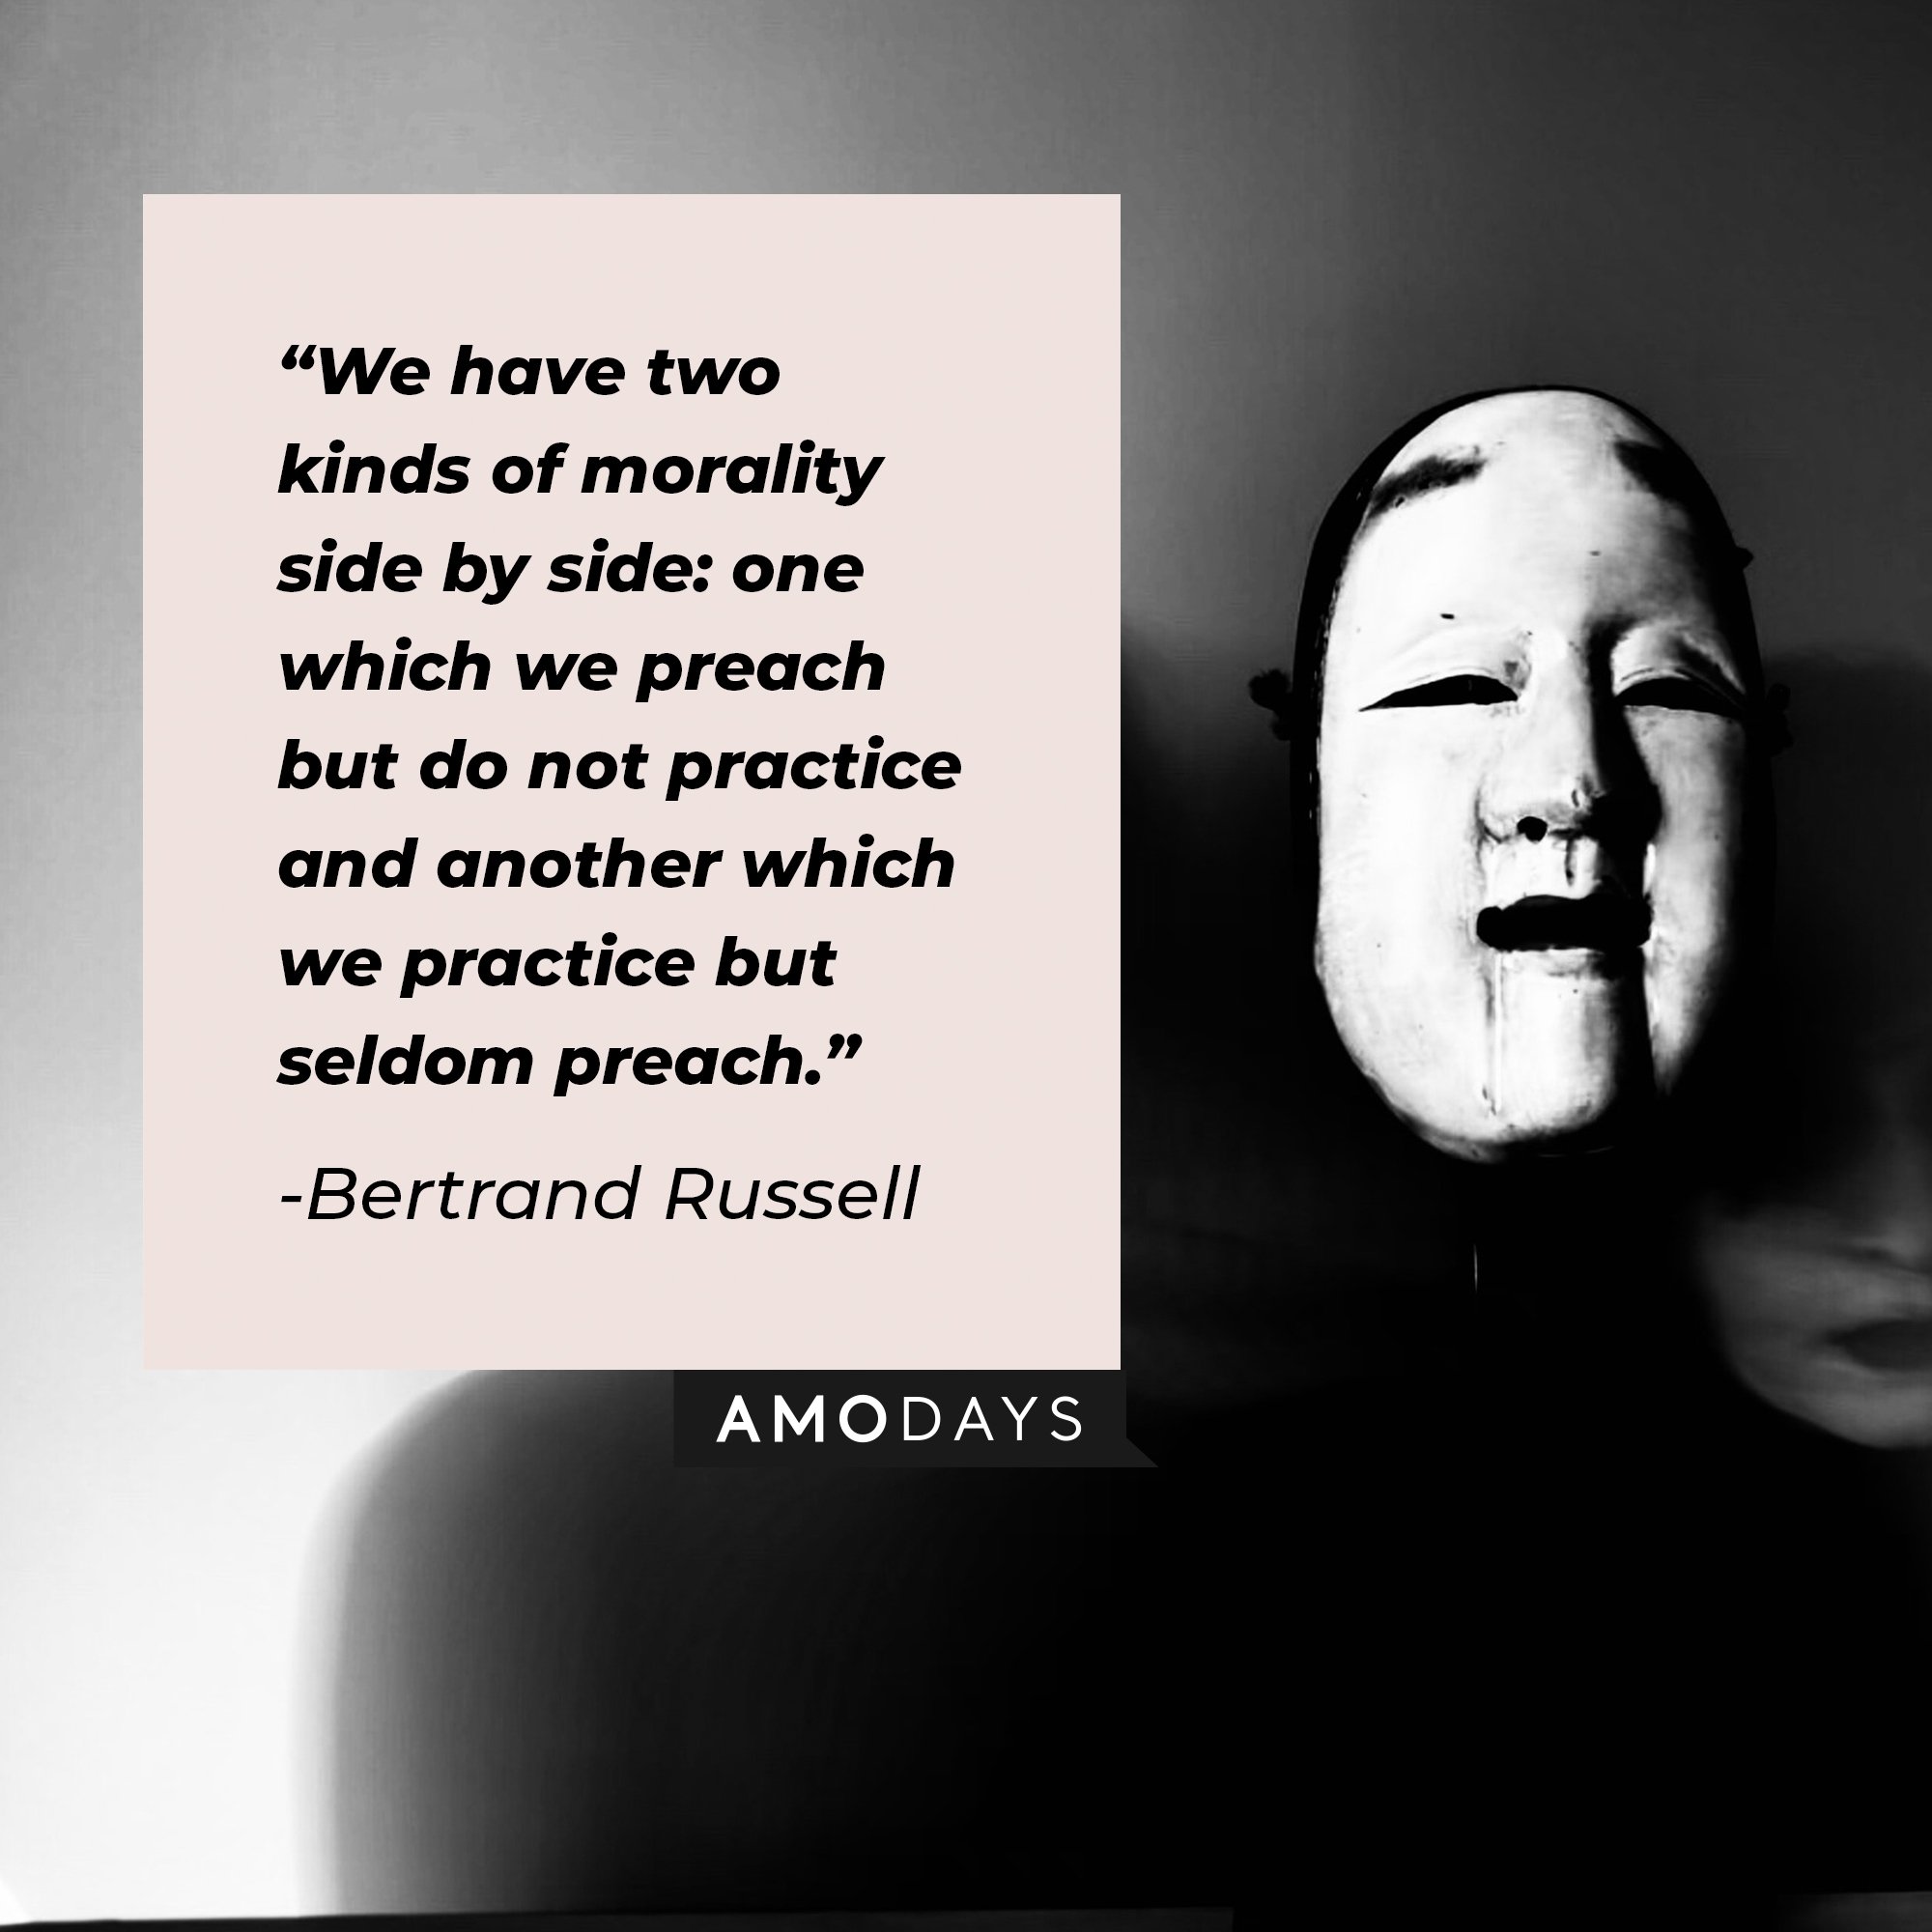 Bertrand Russell’s quote: "We have two kinds of morality side by side: one which we preach but do not practice and another which we practice but seldom preach." | Image: AmoDays  